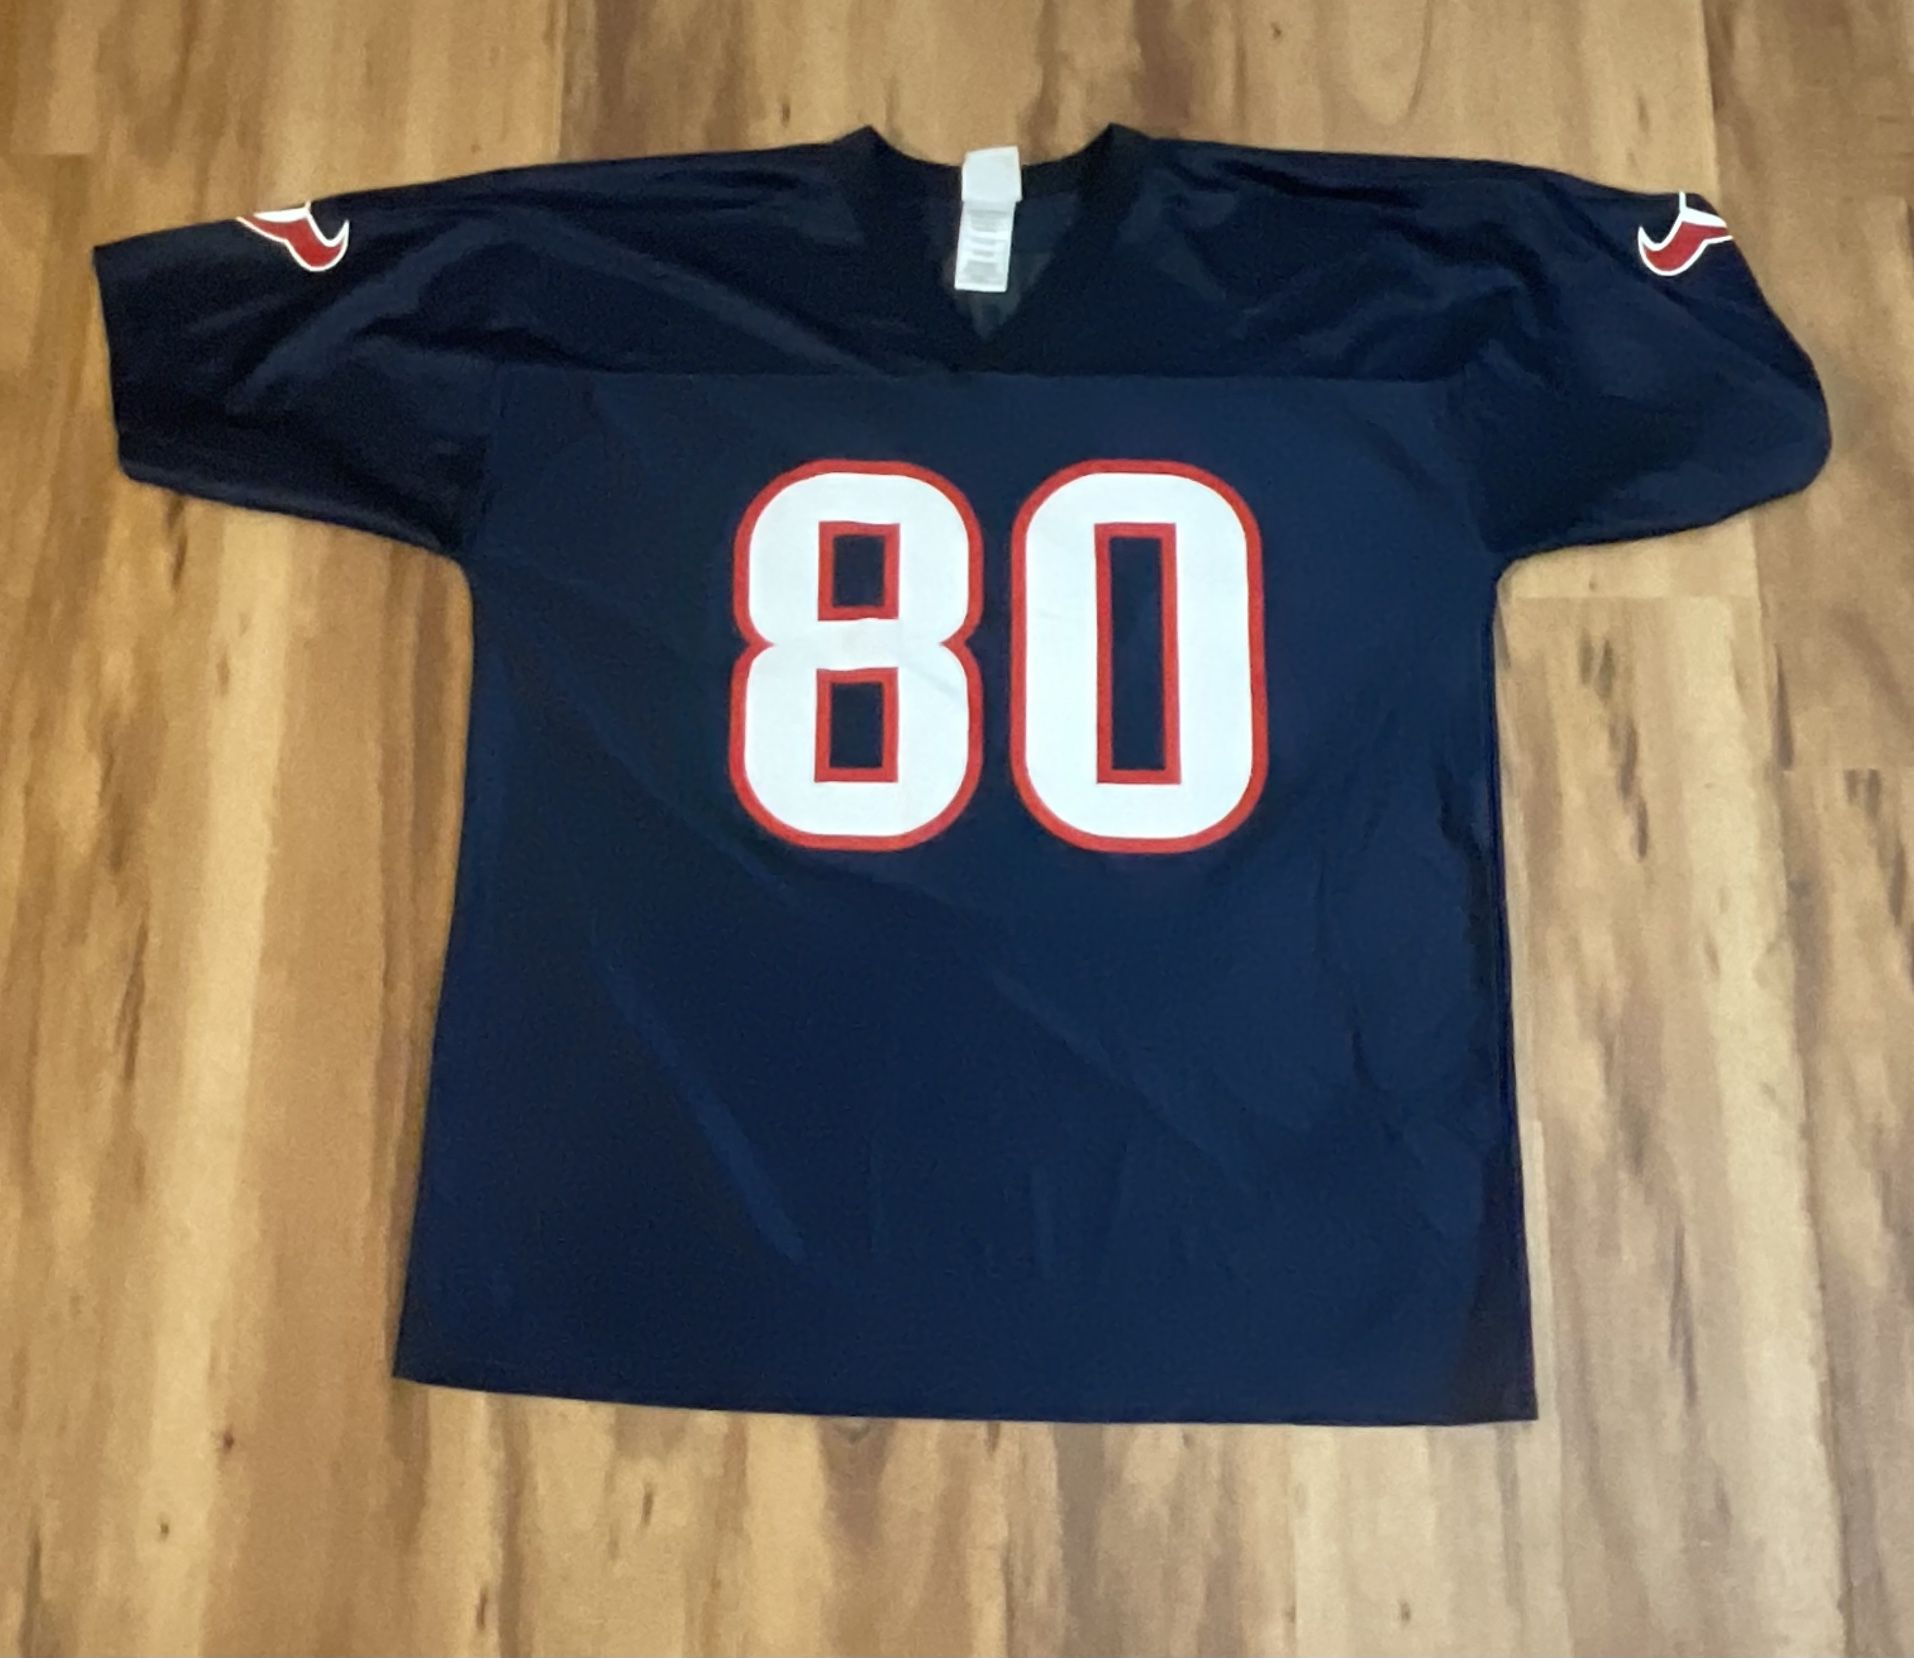  NFL Team Apparel NFL Houston Texans #80 A. Johnson Jersey Size XL Pre-owned, no rips, tears or stains Direct to garment printed